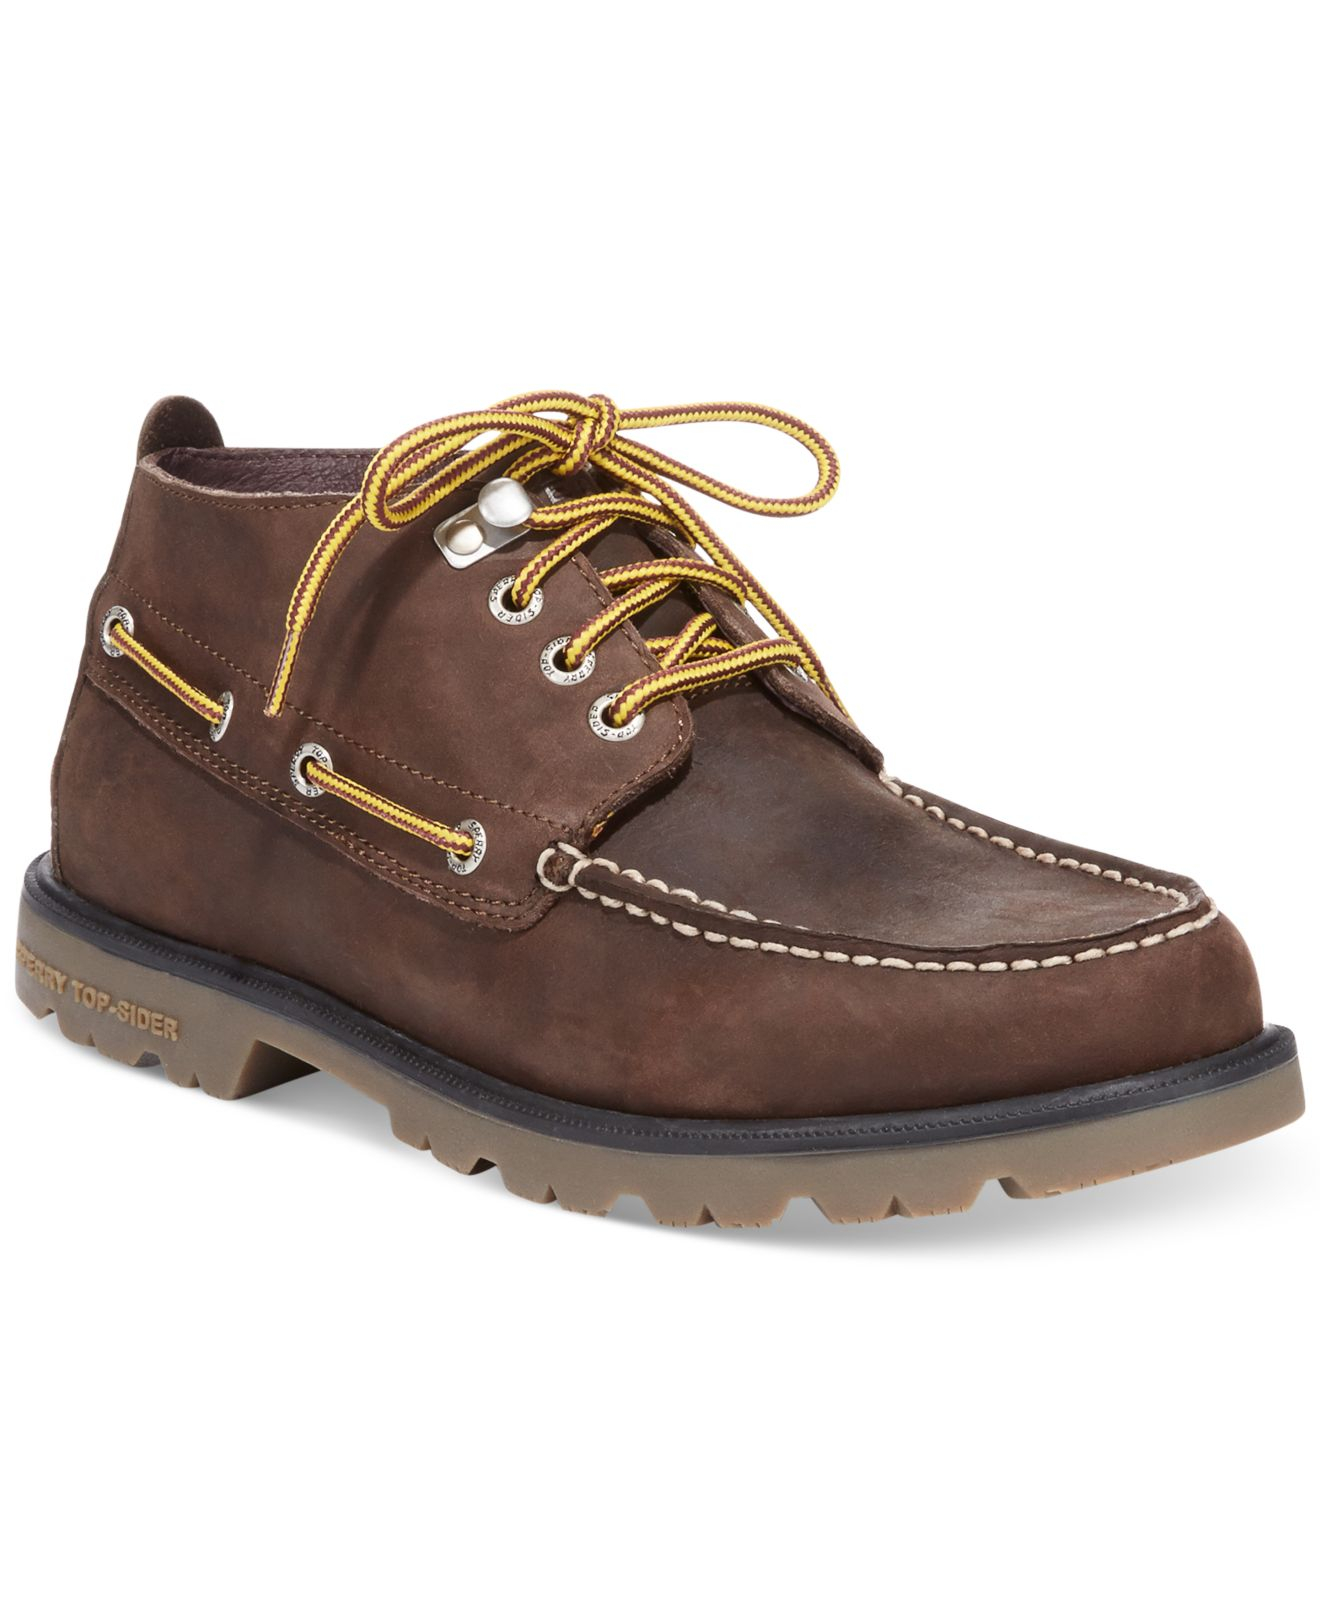 Sperry Top-Sider A/O Waterproof Lug Chukka Boots in Brown for Men - Lyst